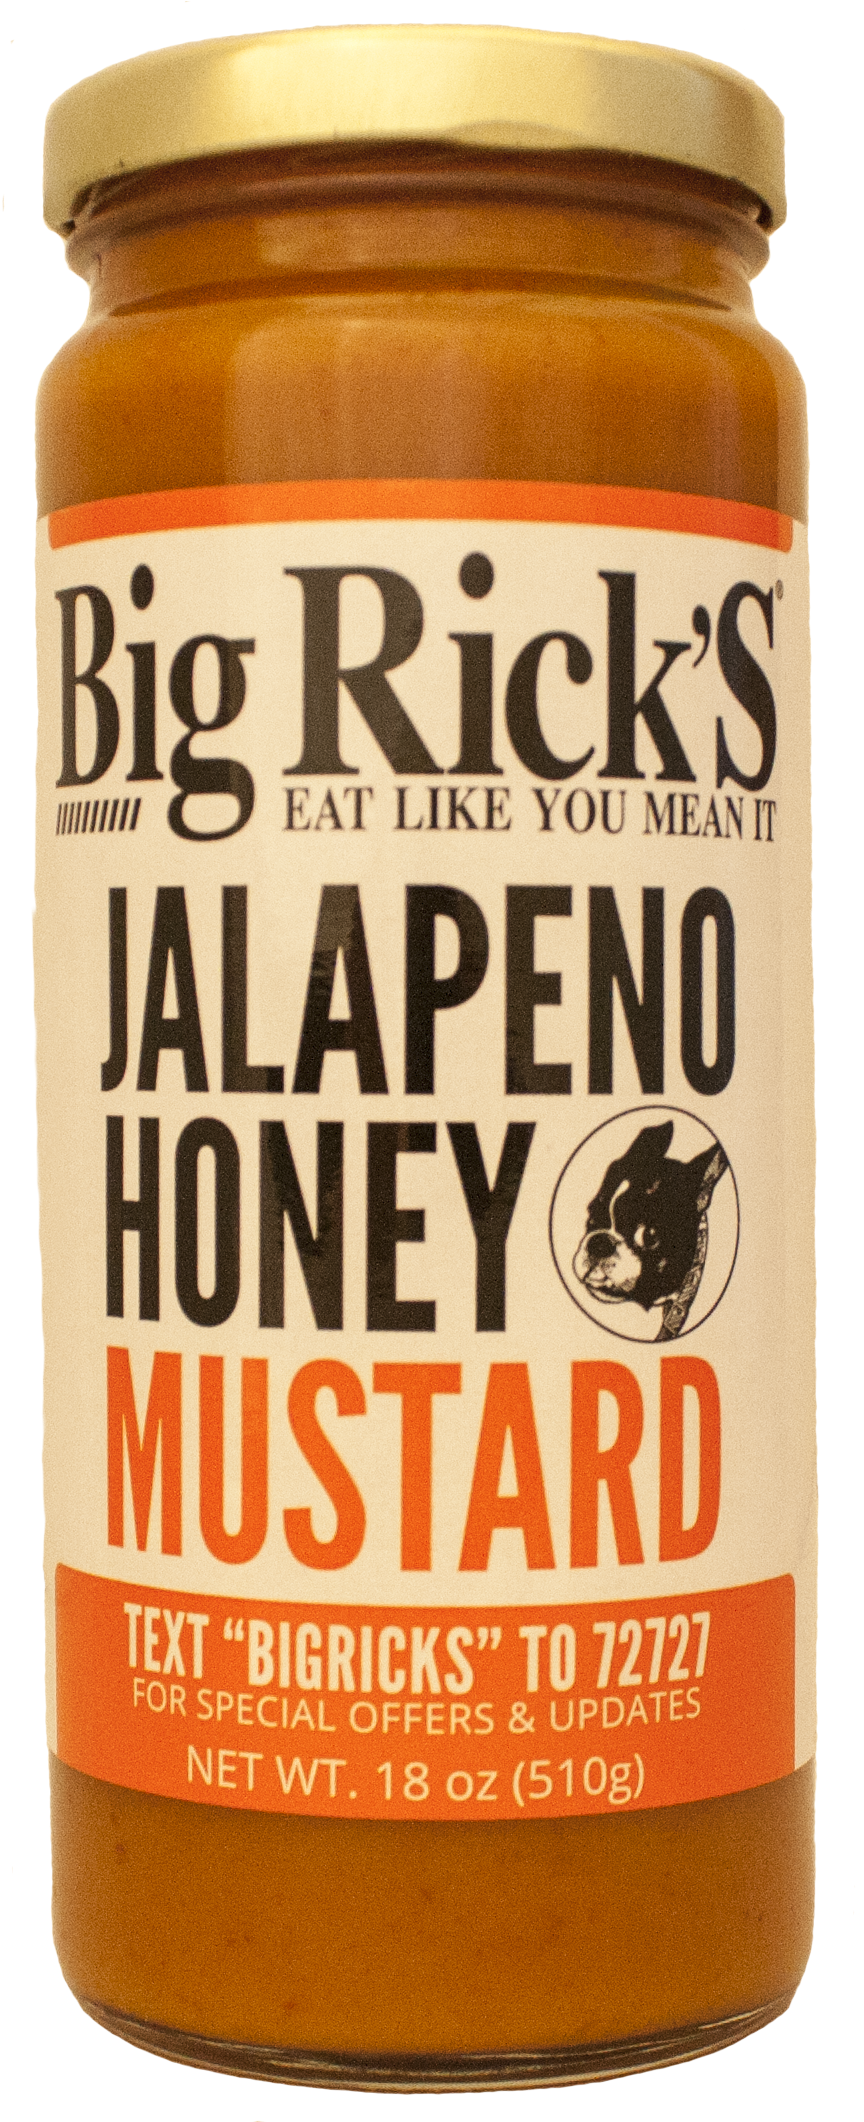 A Label Of Mustard With Black Text And White Text